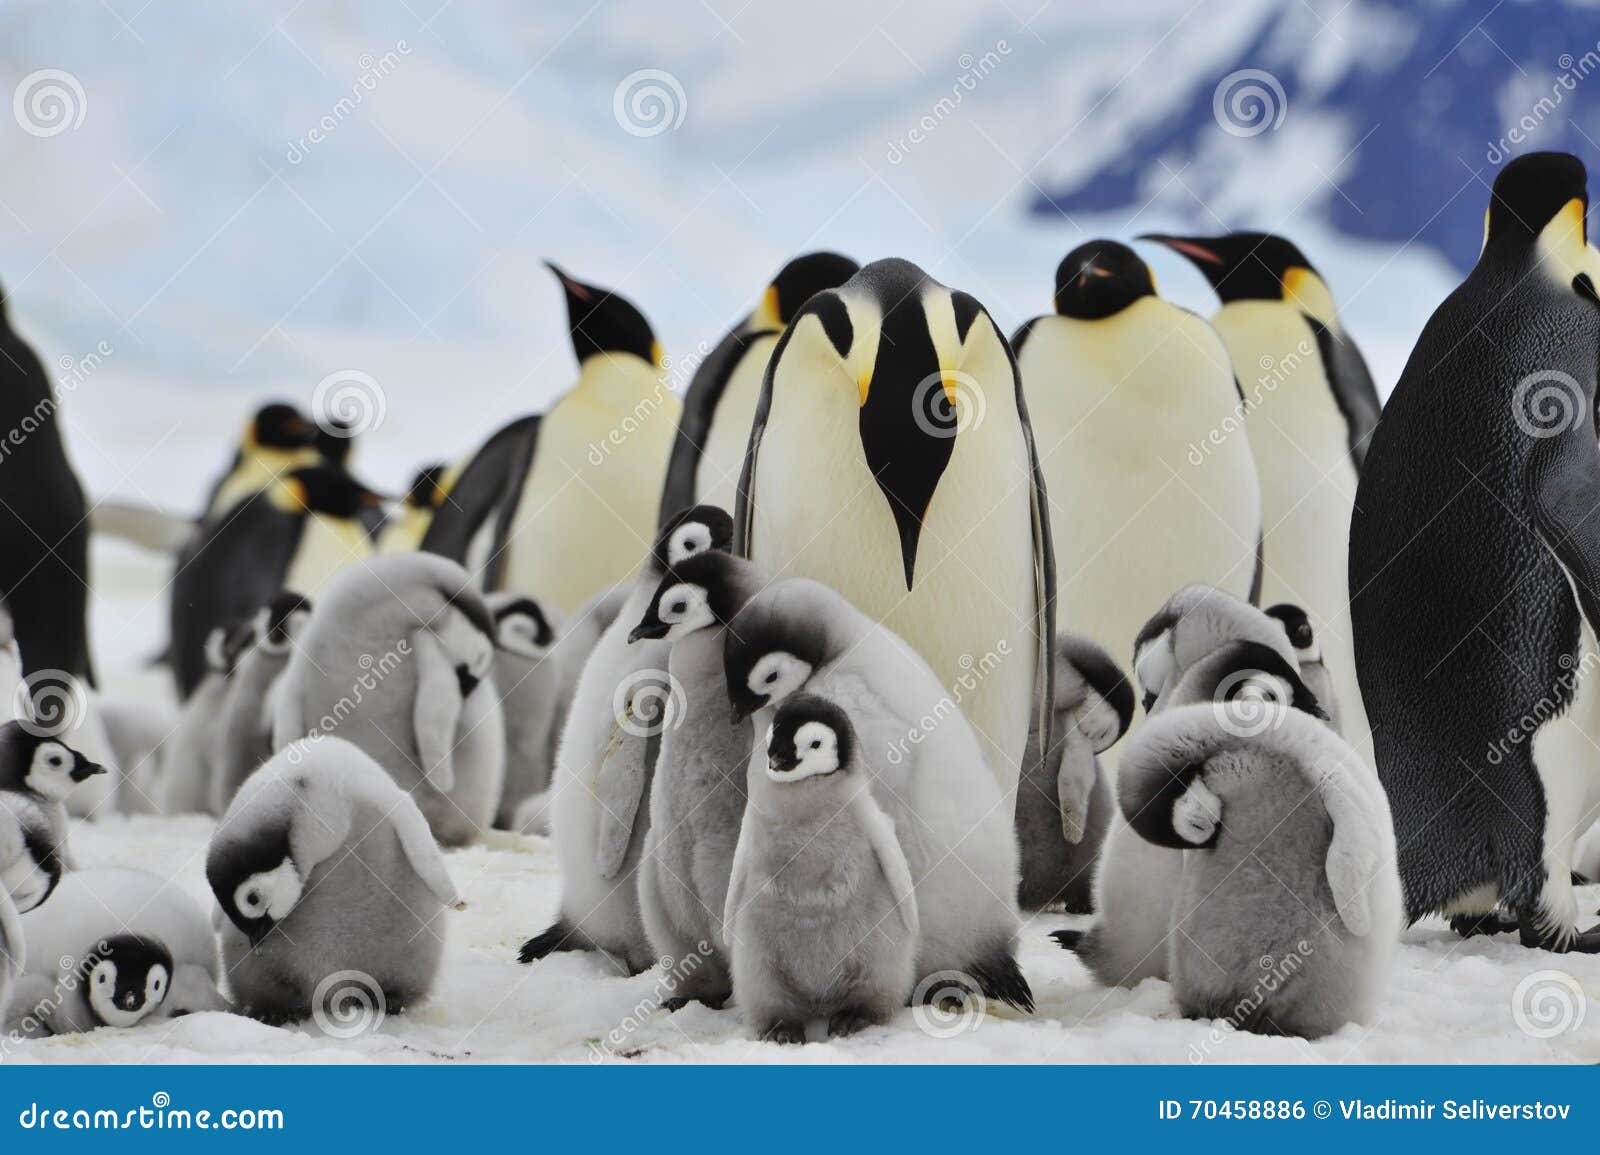 emperor penguins with chick